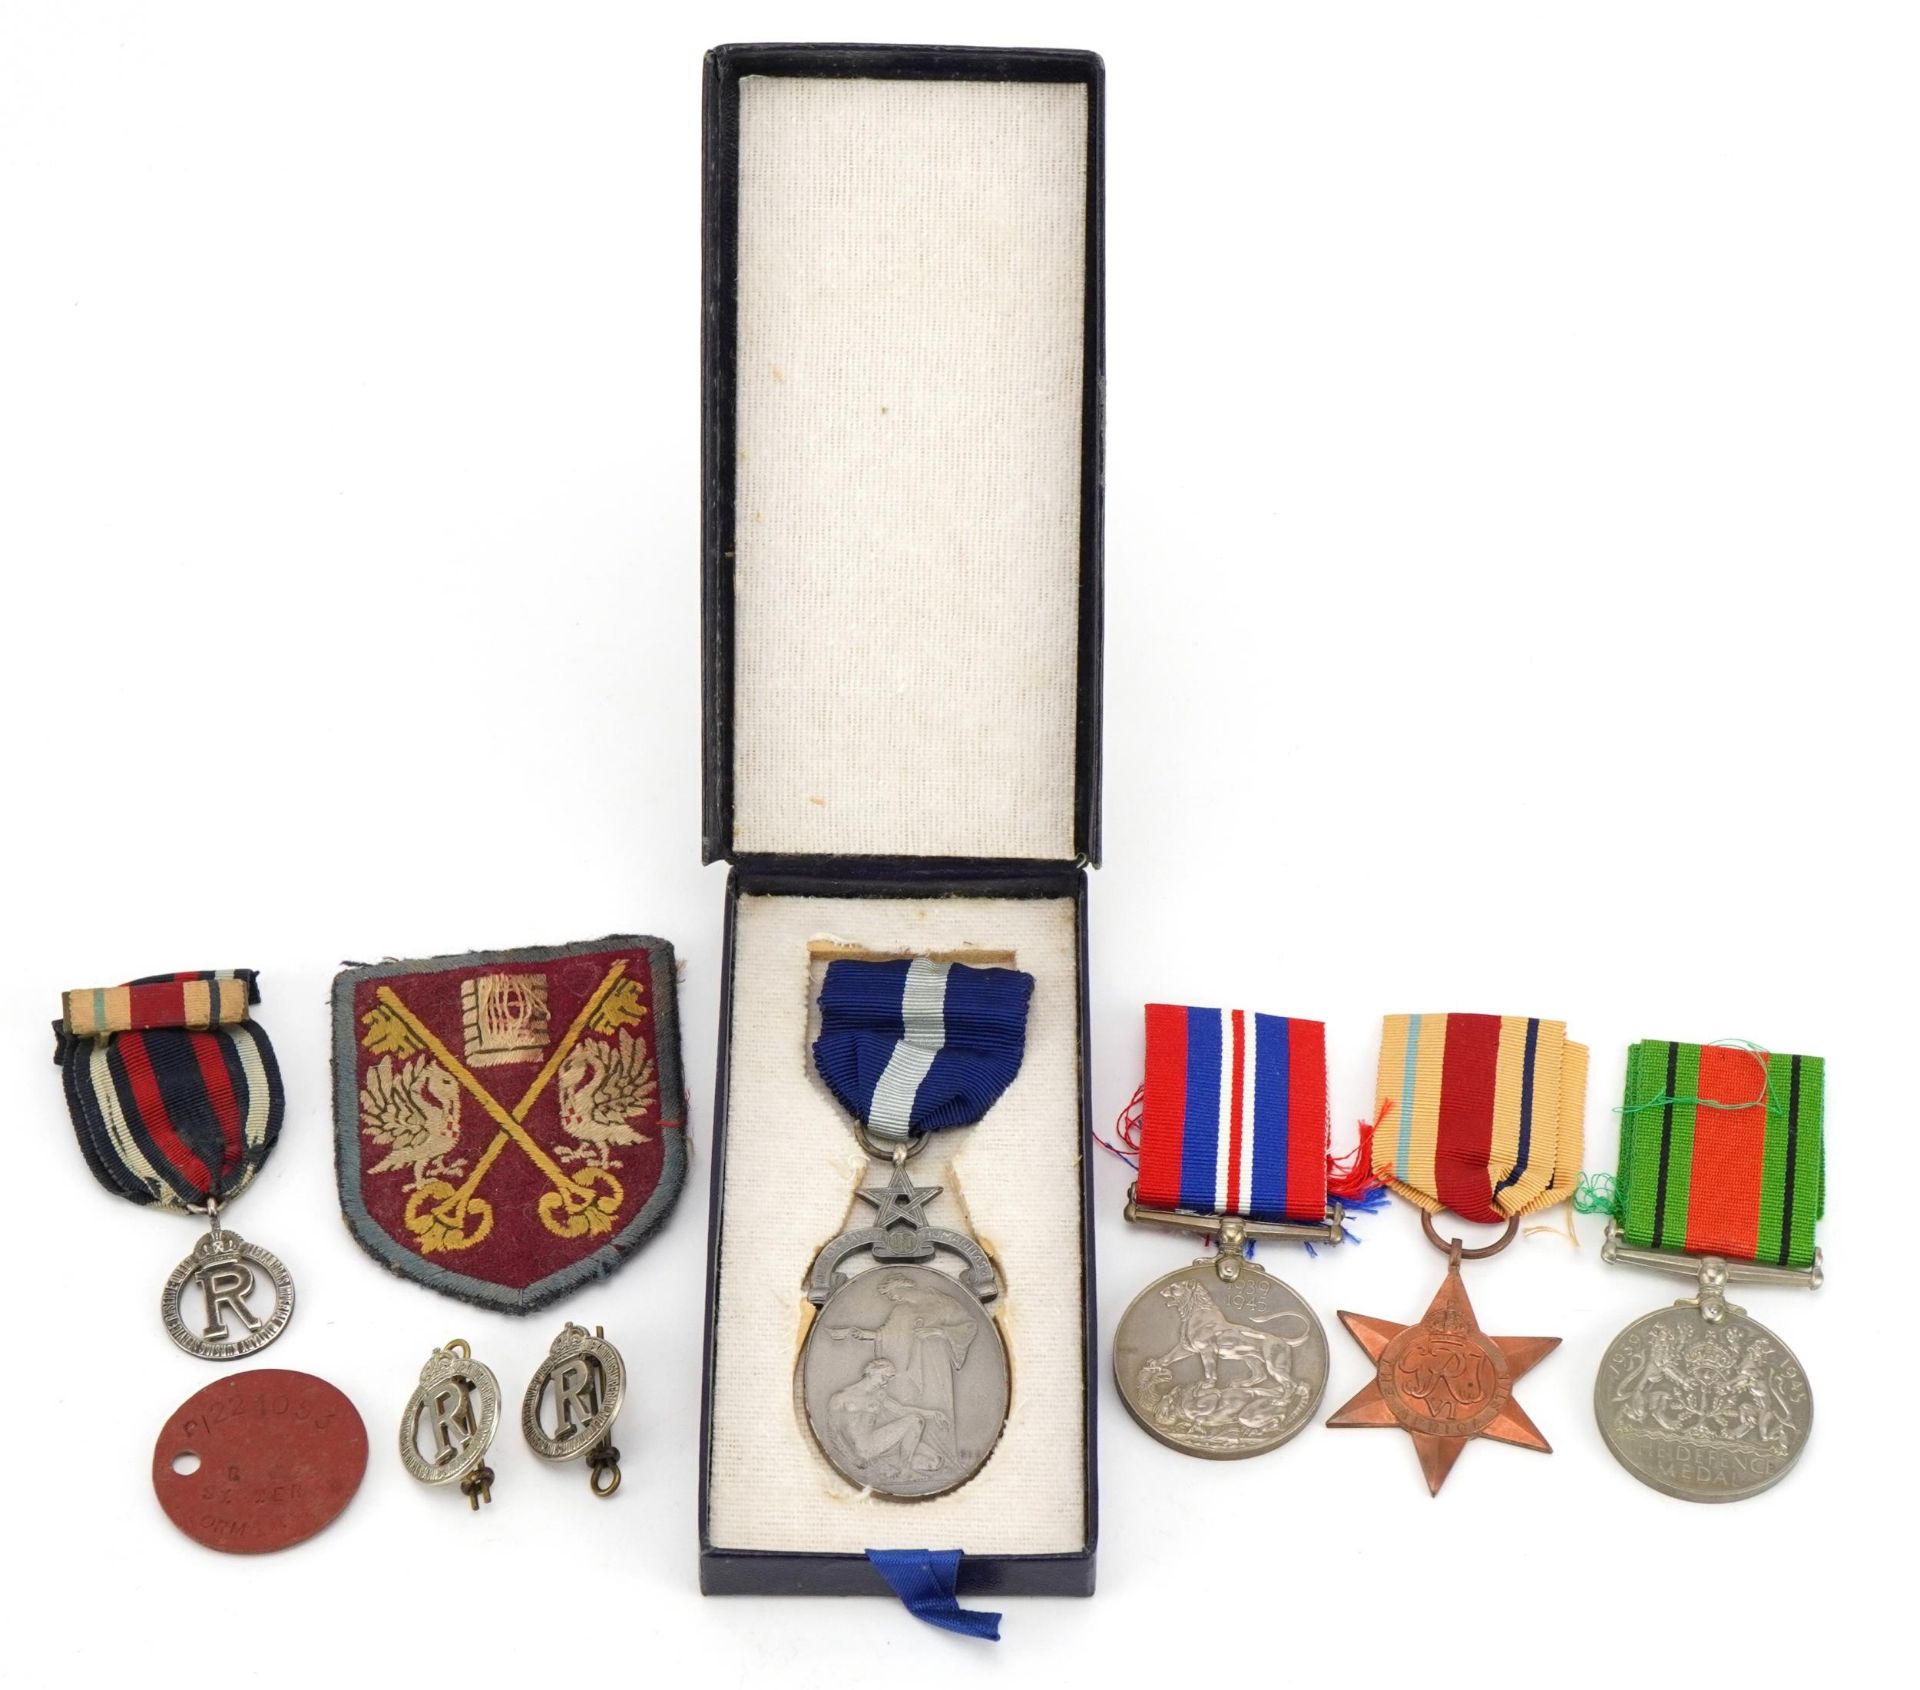 British military World War II medal group including masonic medal awarded to W Bro J M Norman, three